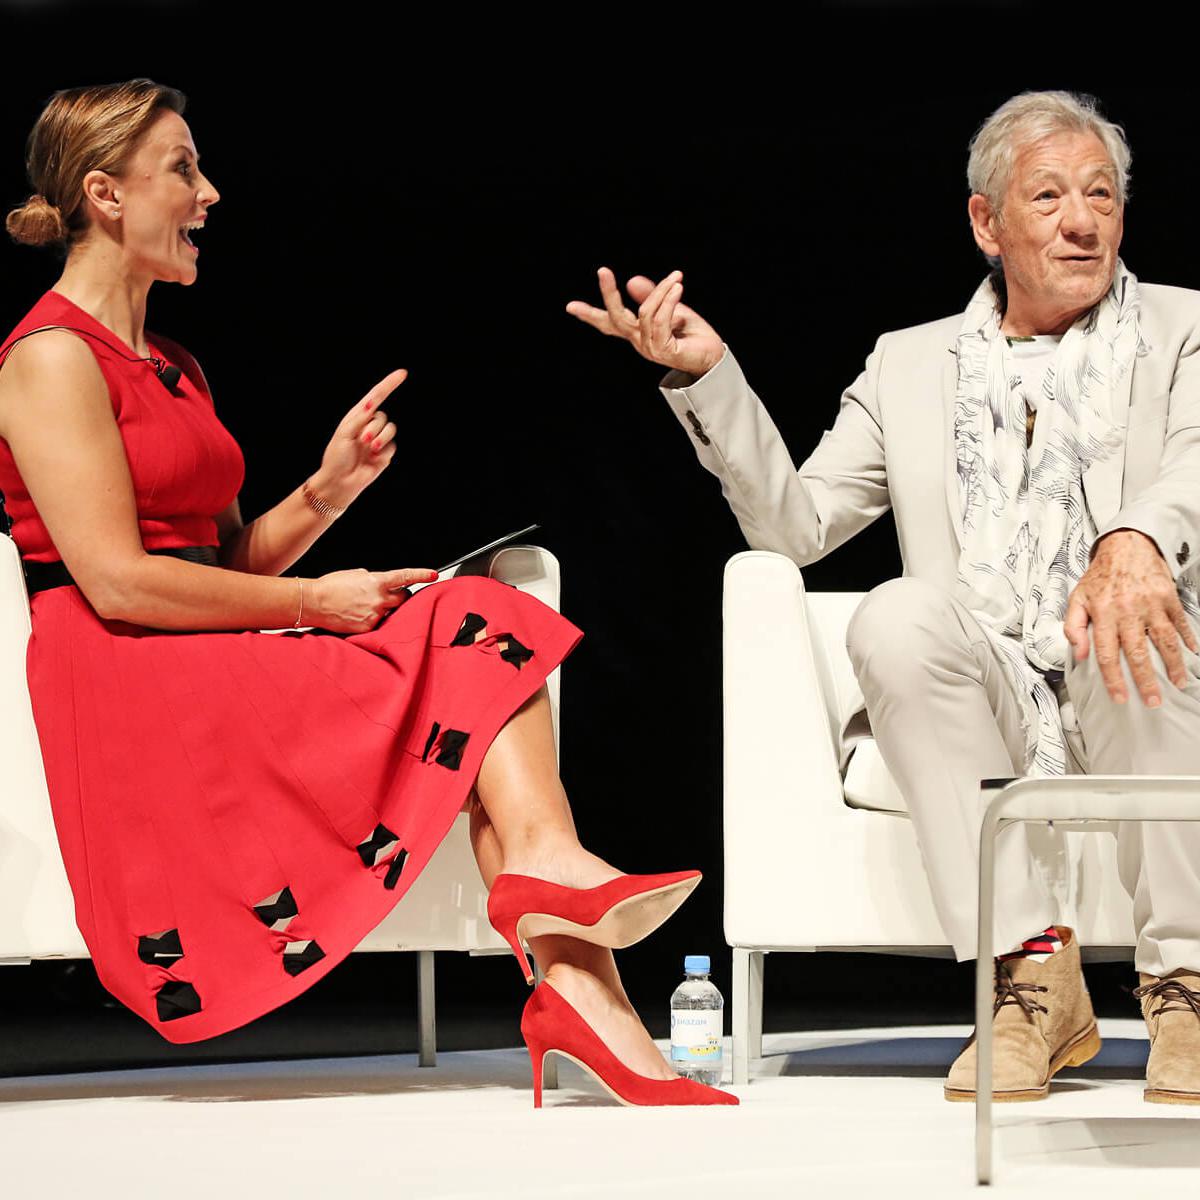 Photograph of Actor, Sir Ian McKellen by Julian Hanford at Cannes Lions 2017